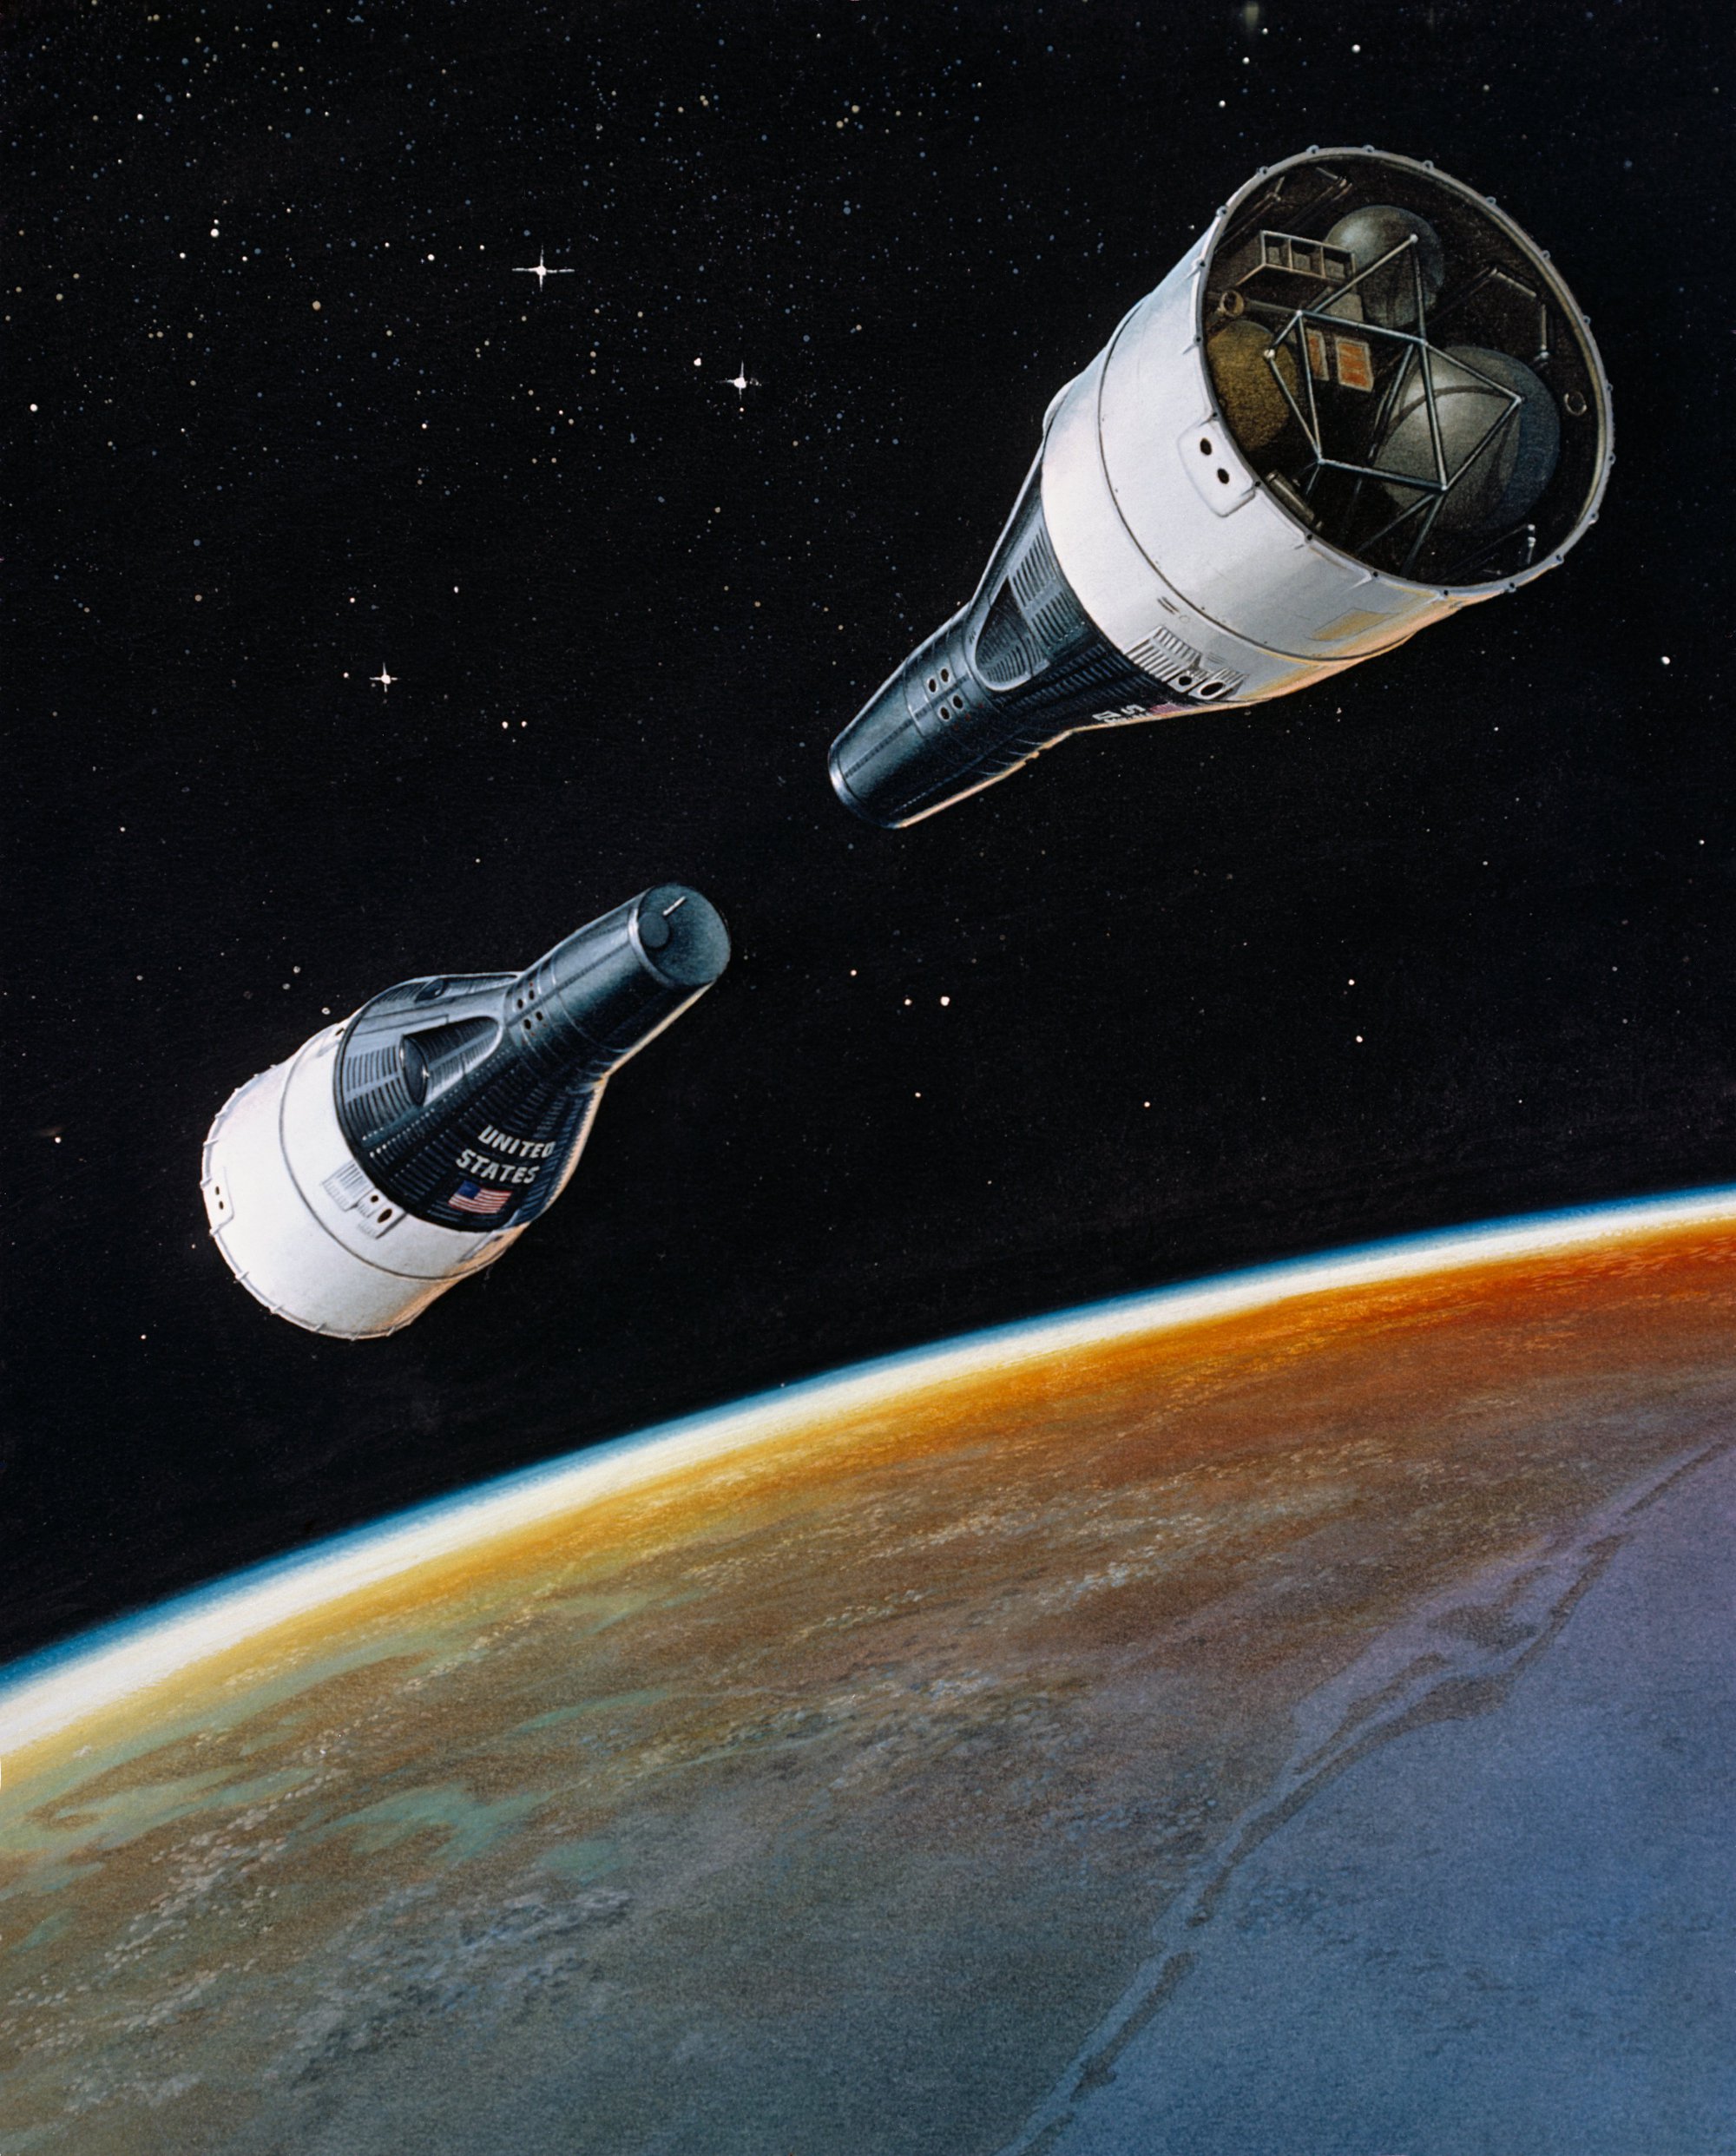 Source: https://commons.wikimedia.org/wiki/File:RENDEZVOUS_-_ARTIST_CONCEPT_-_GEMINI-TITAN_GT-VI_and_GT-VII.jpg